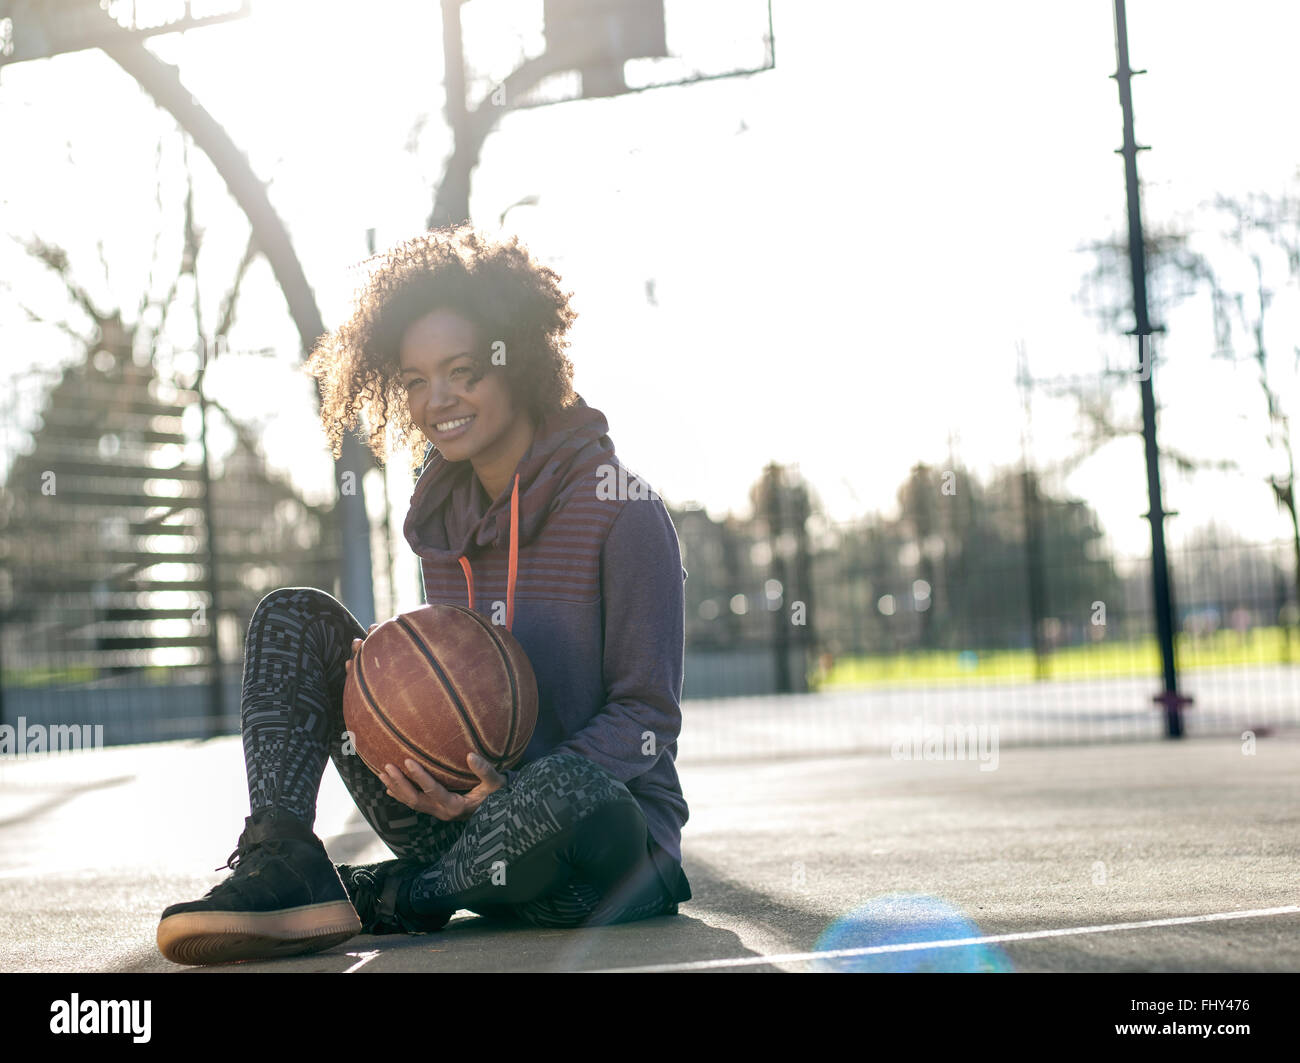 Portrait of smiling young woman with basketball sitting on a playing field Stock Photo